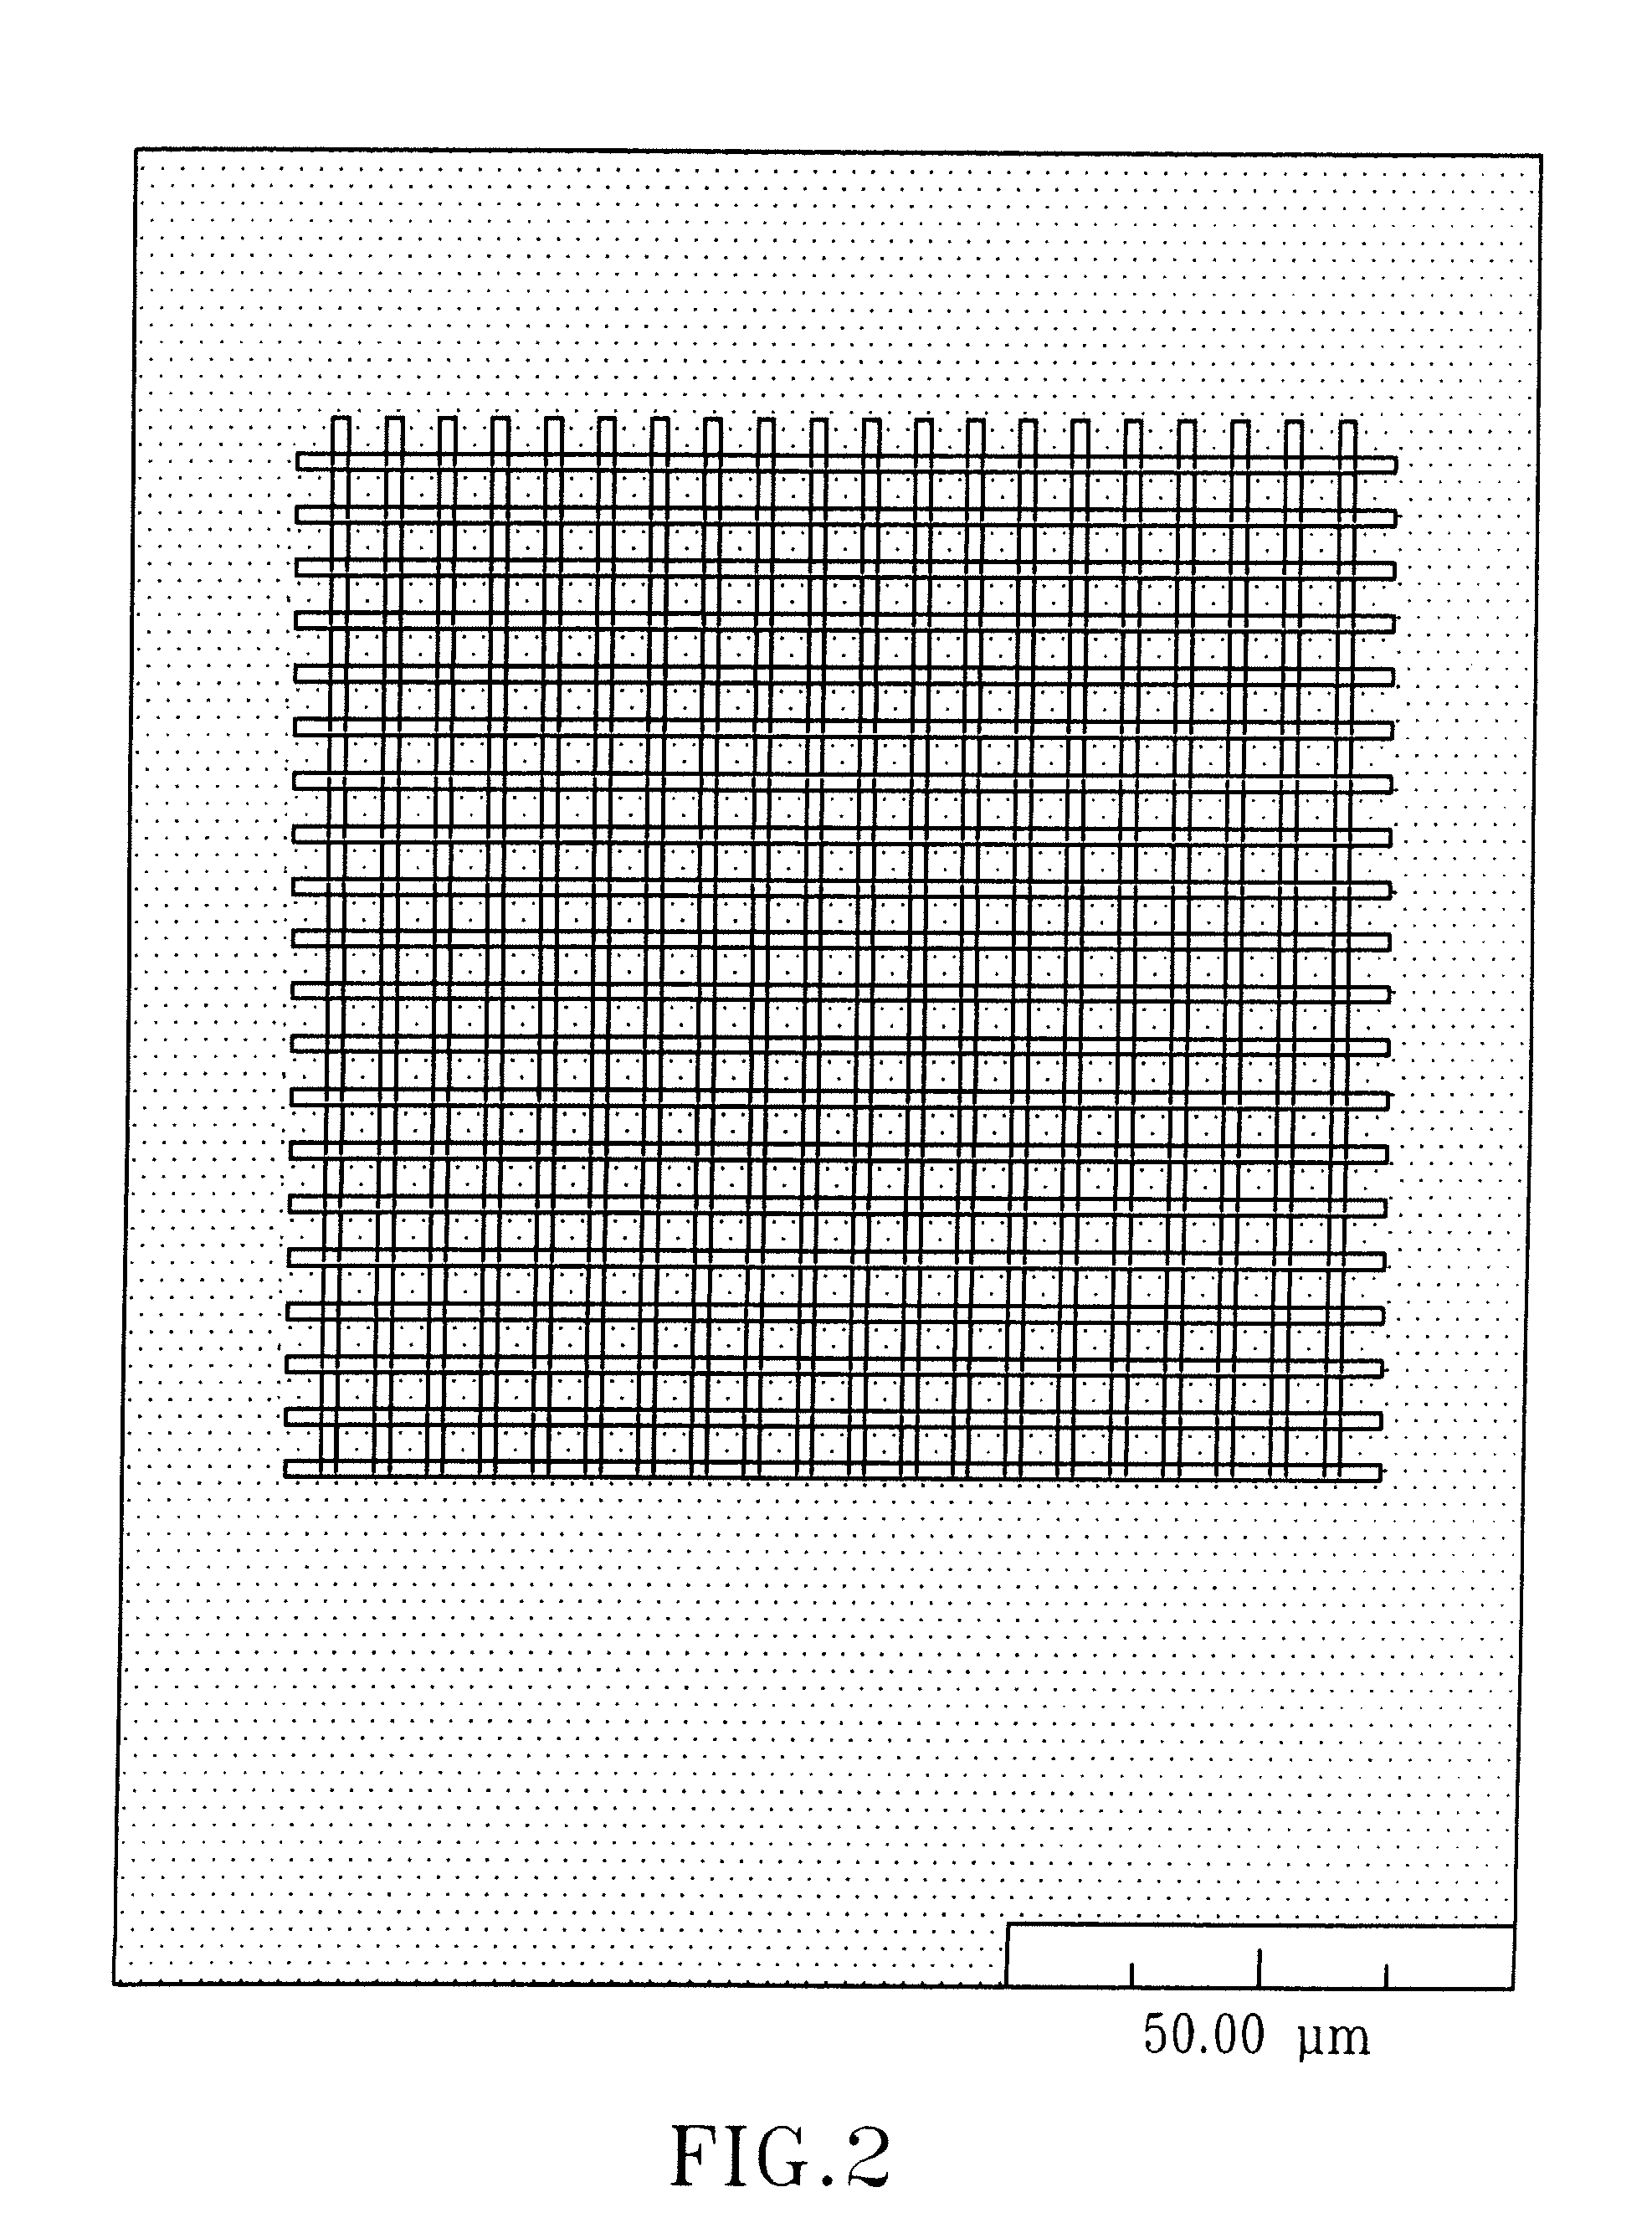 Optical material and method for modifying the refractive index